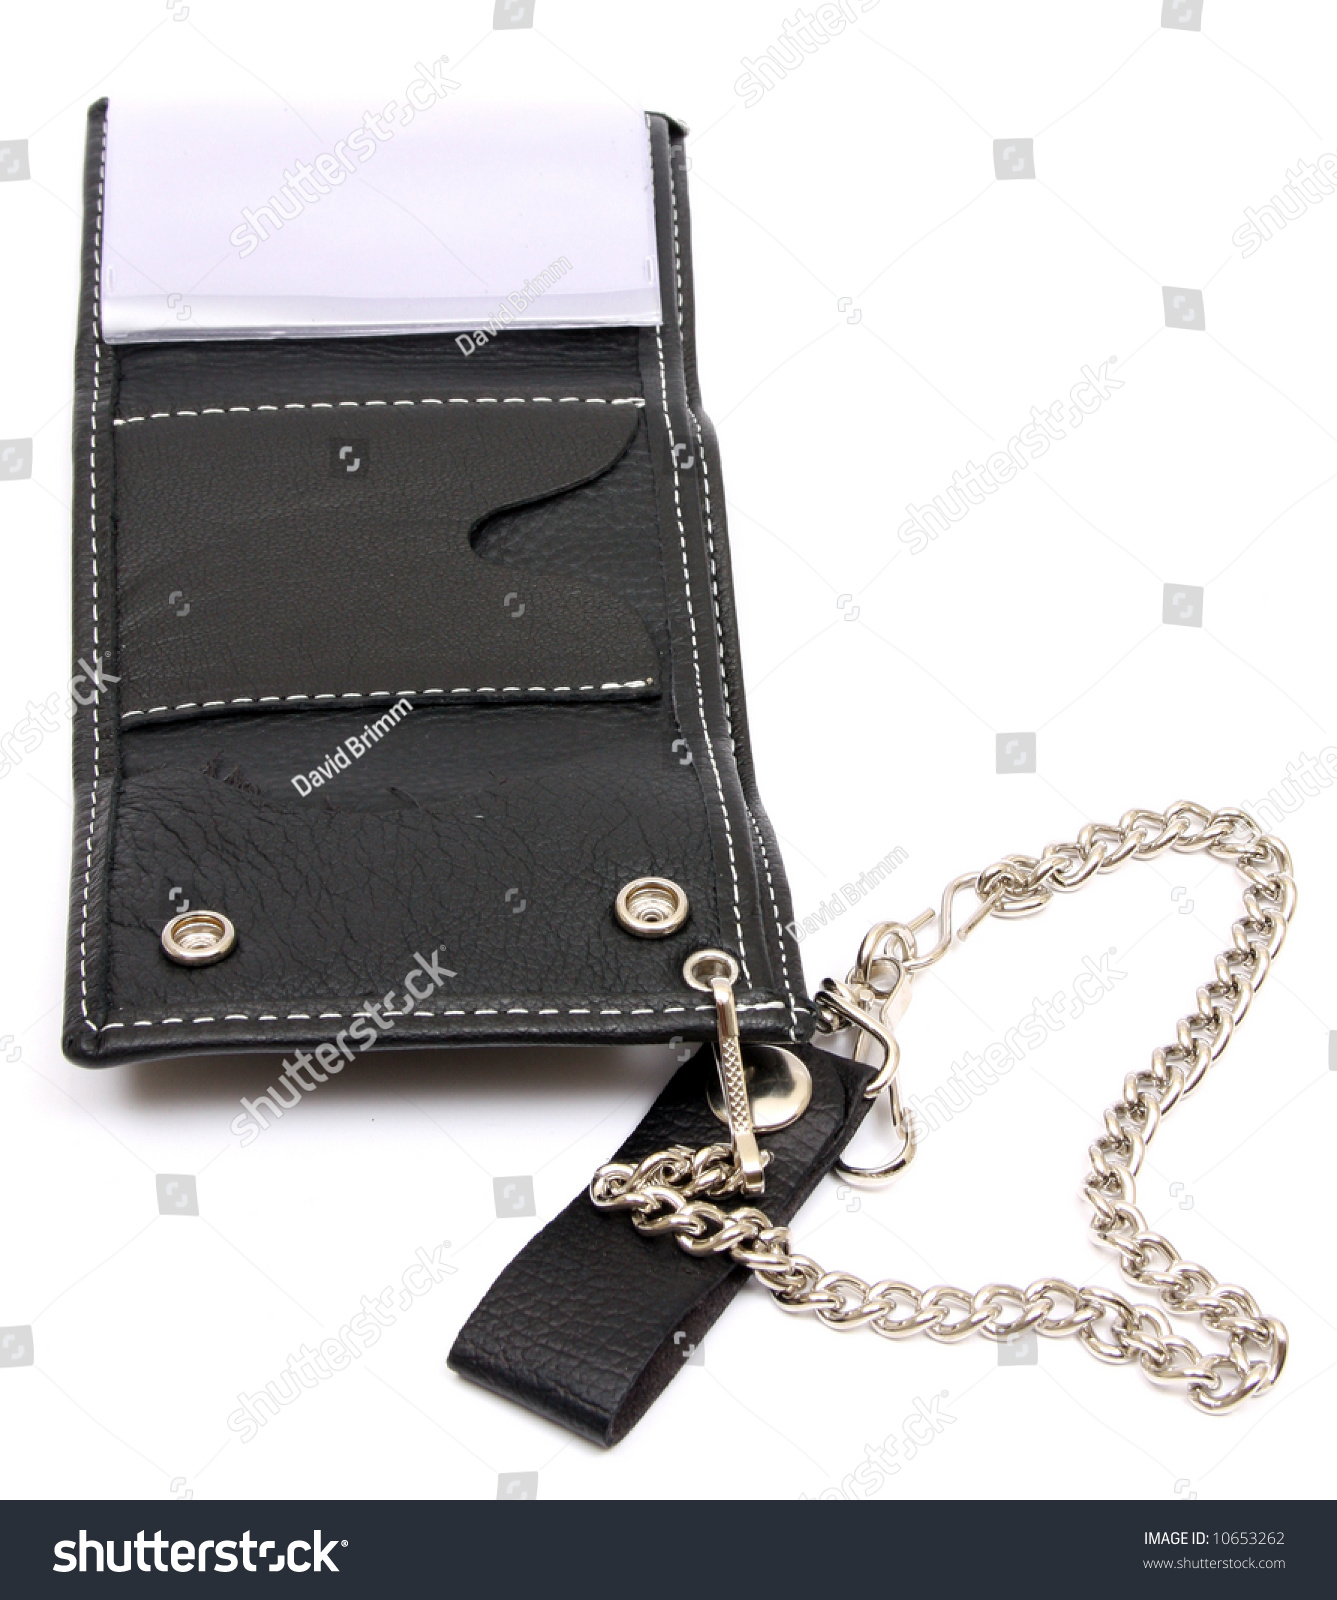 A Leather Mens Wallet With Wallet Chain Attached. Stock Photo 10653262 : Shutterstock